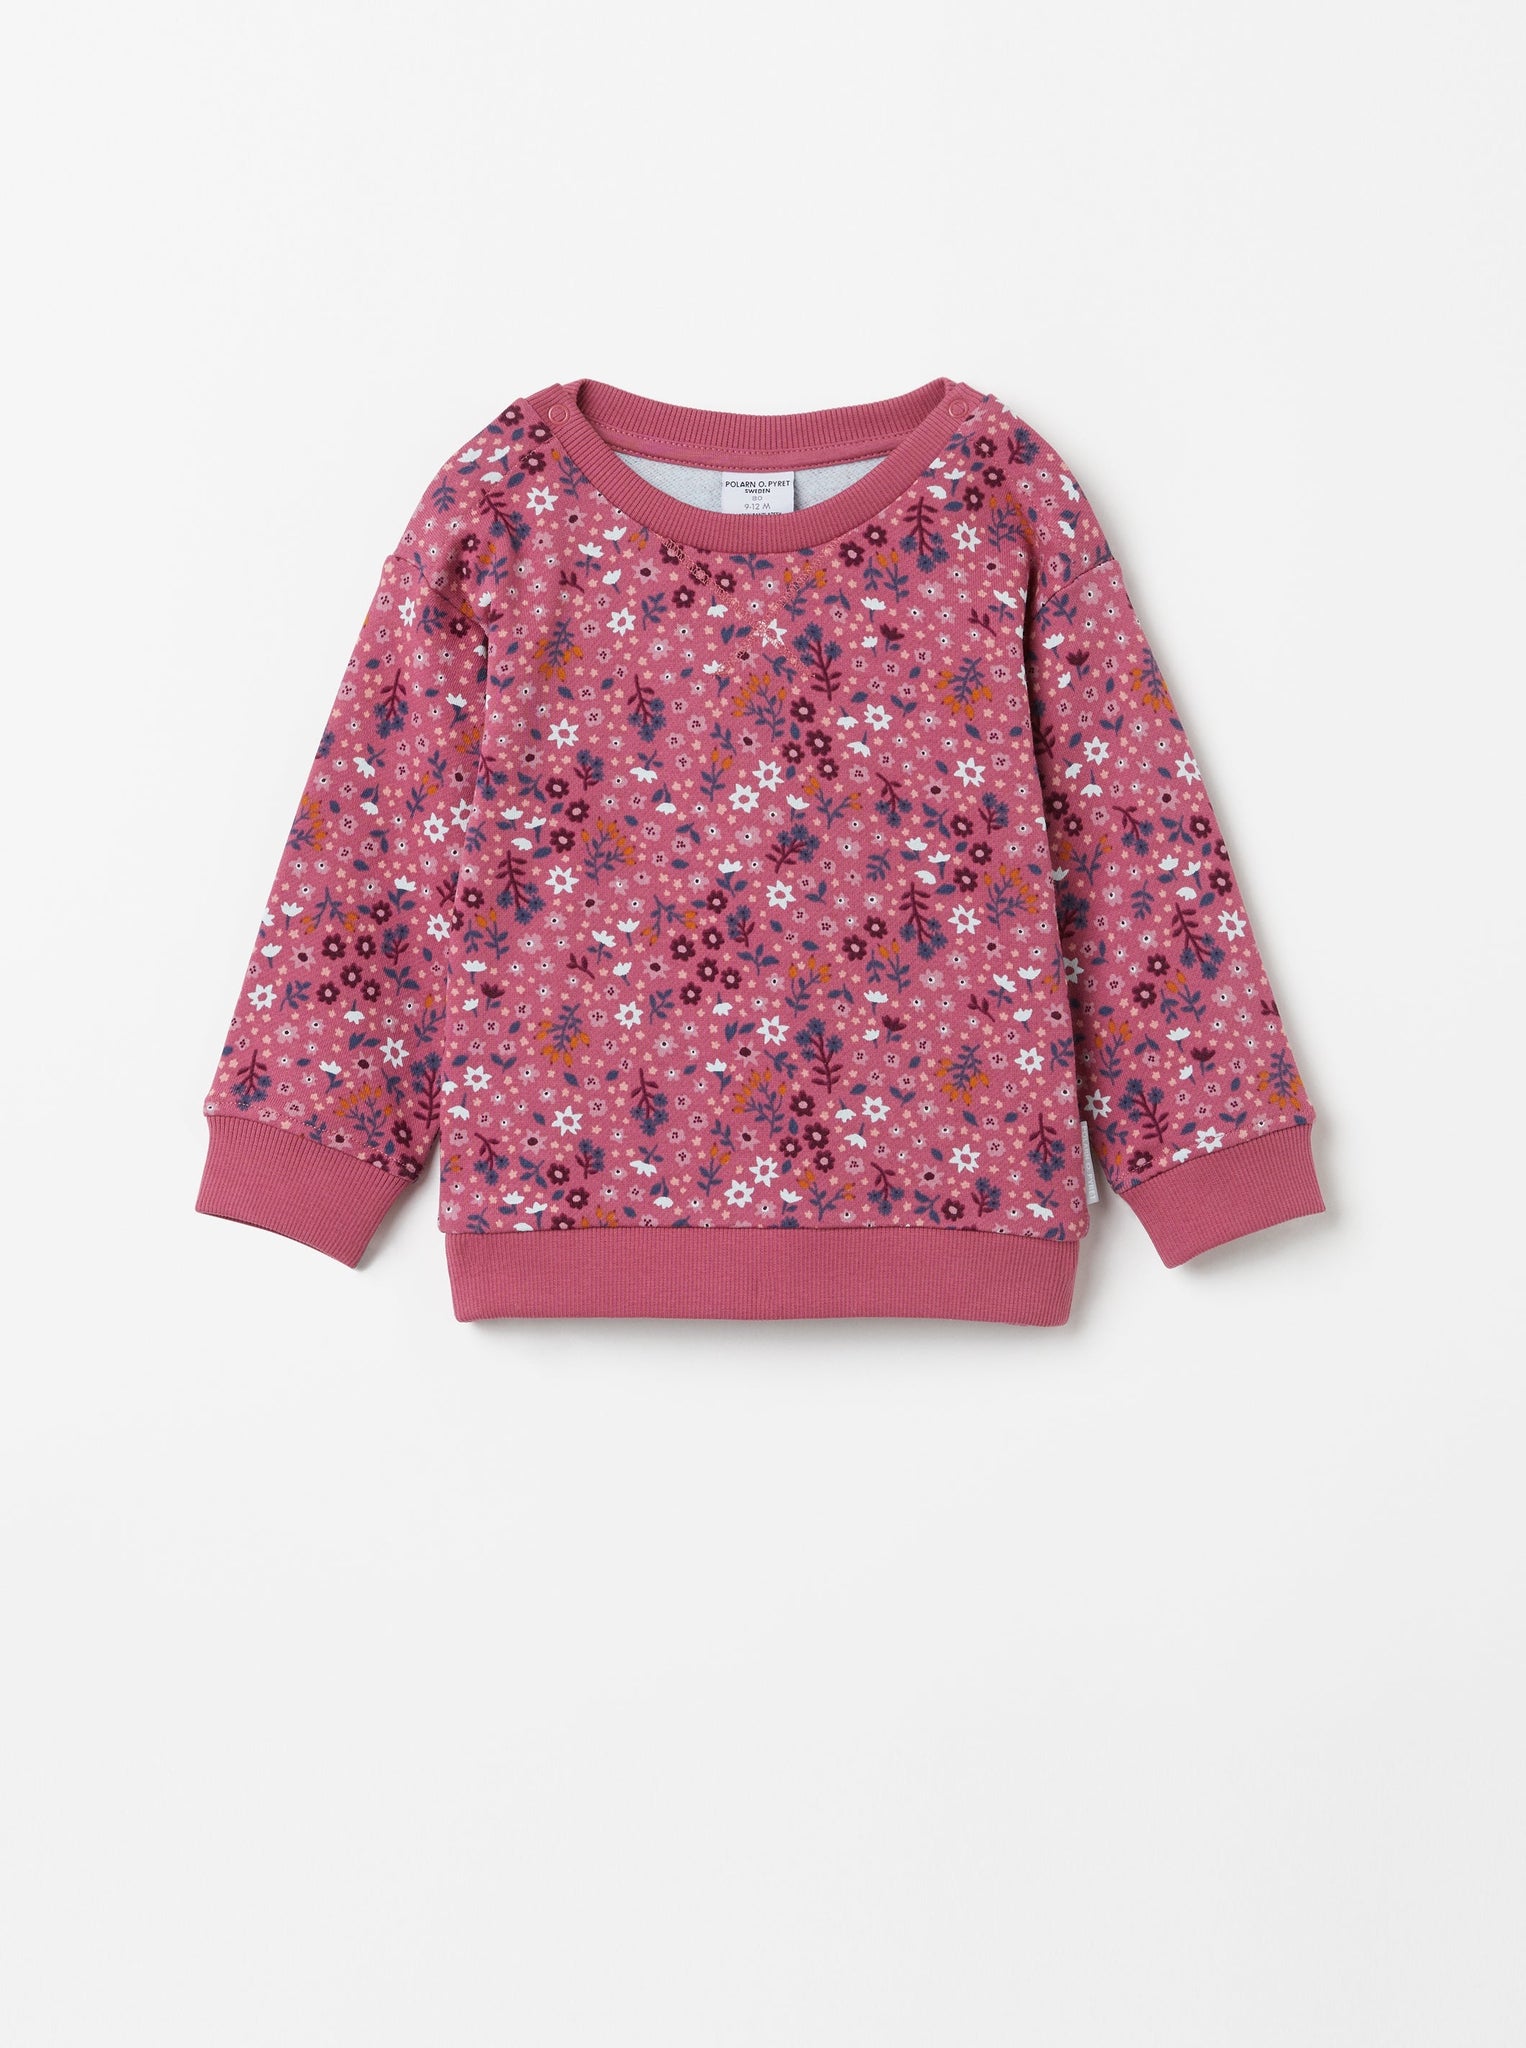 Pink Floral Baby Sweatshirt from the Polarn O. Pyret Kidswear collection. Clothes made using sustainably sourced materials.